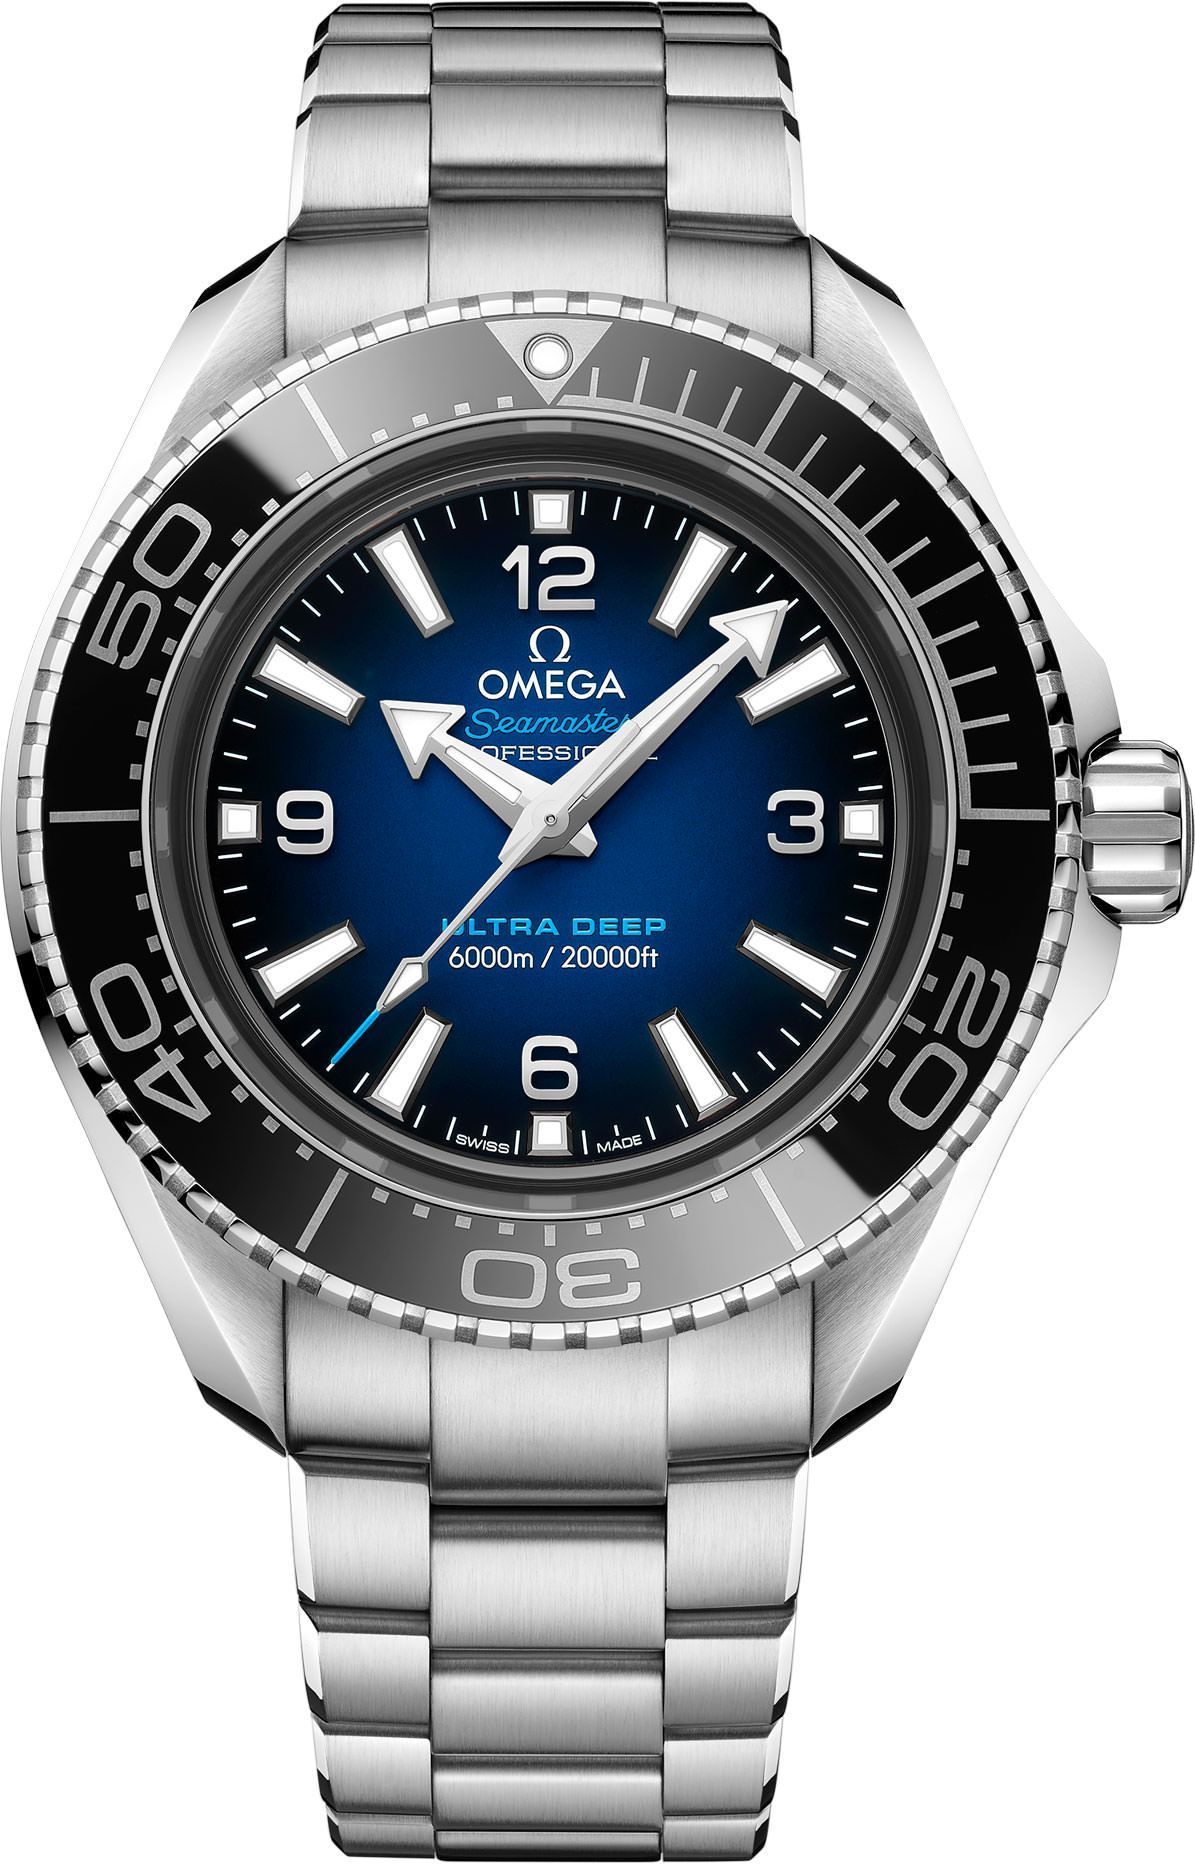 Omega Seamaster Planet Ocean Blue Dial 45.5 mm Automatic Watch For Men - 1